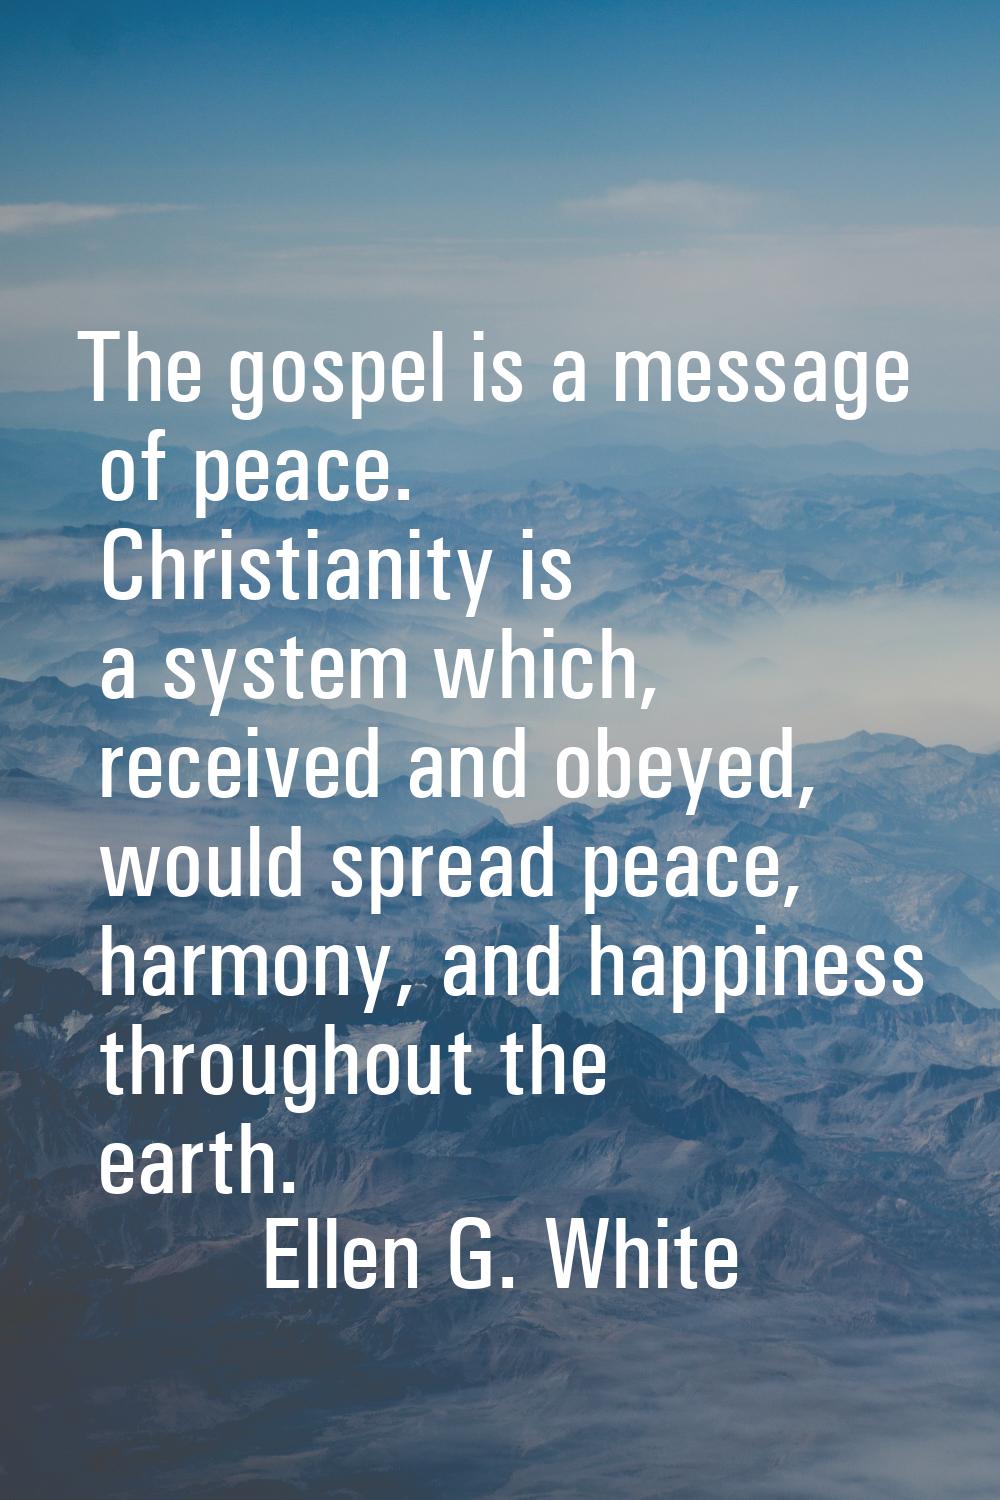 The gospel is a message of peace. Christianity is a system which, received and obeyed, would spread